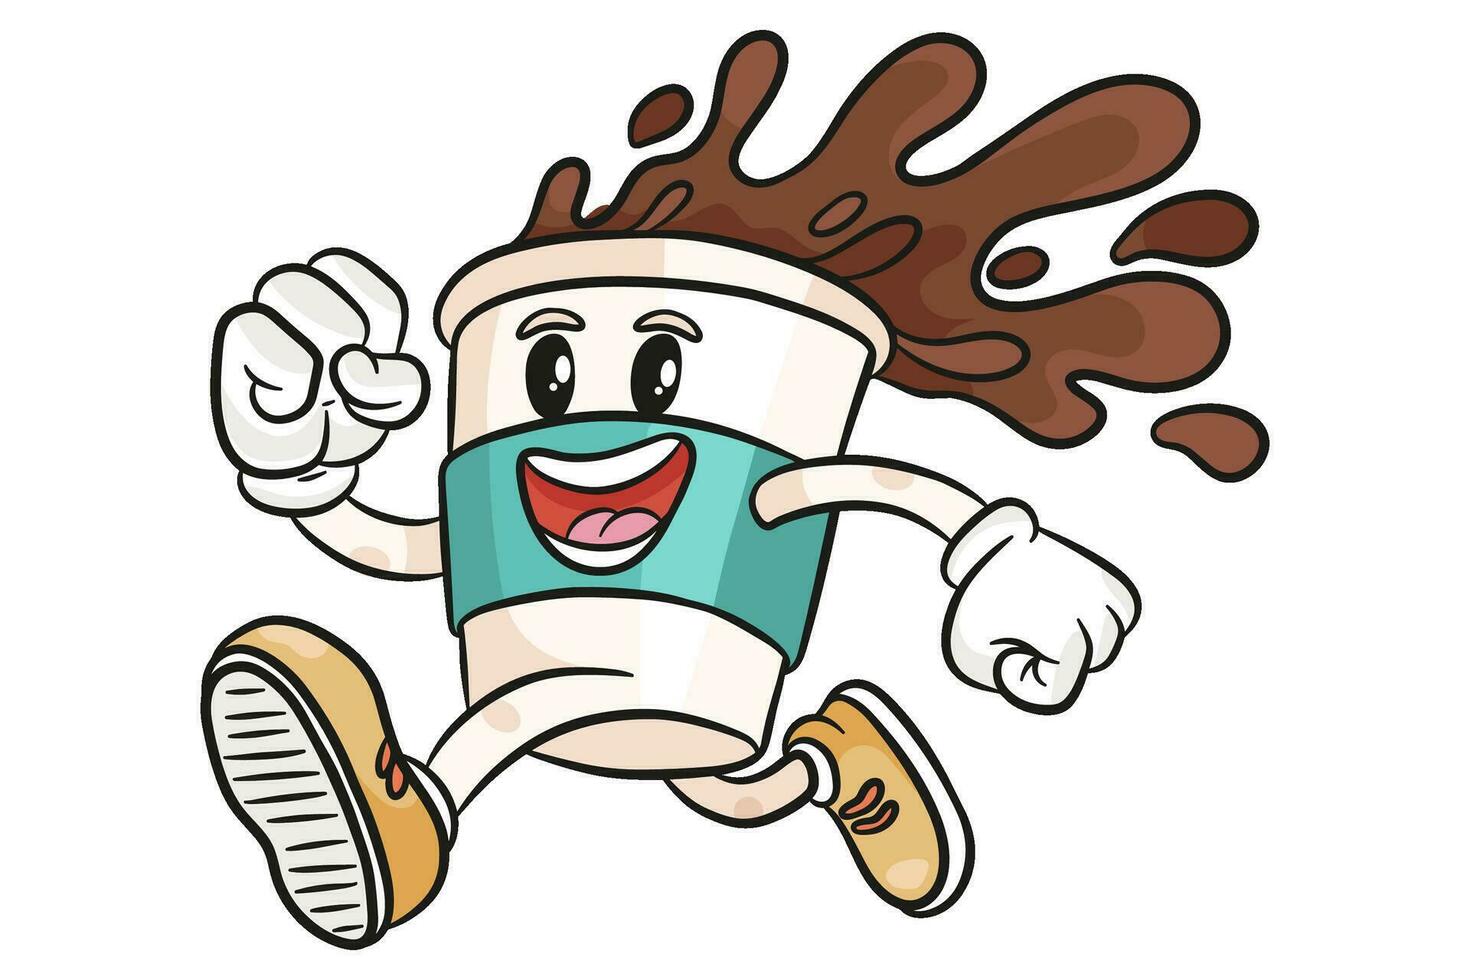 Retro character in groovy style. Cardboard coffee cup in motion, running. Coffee splashes from a cup. Mascot. Cartoon coffee to go character vector